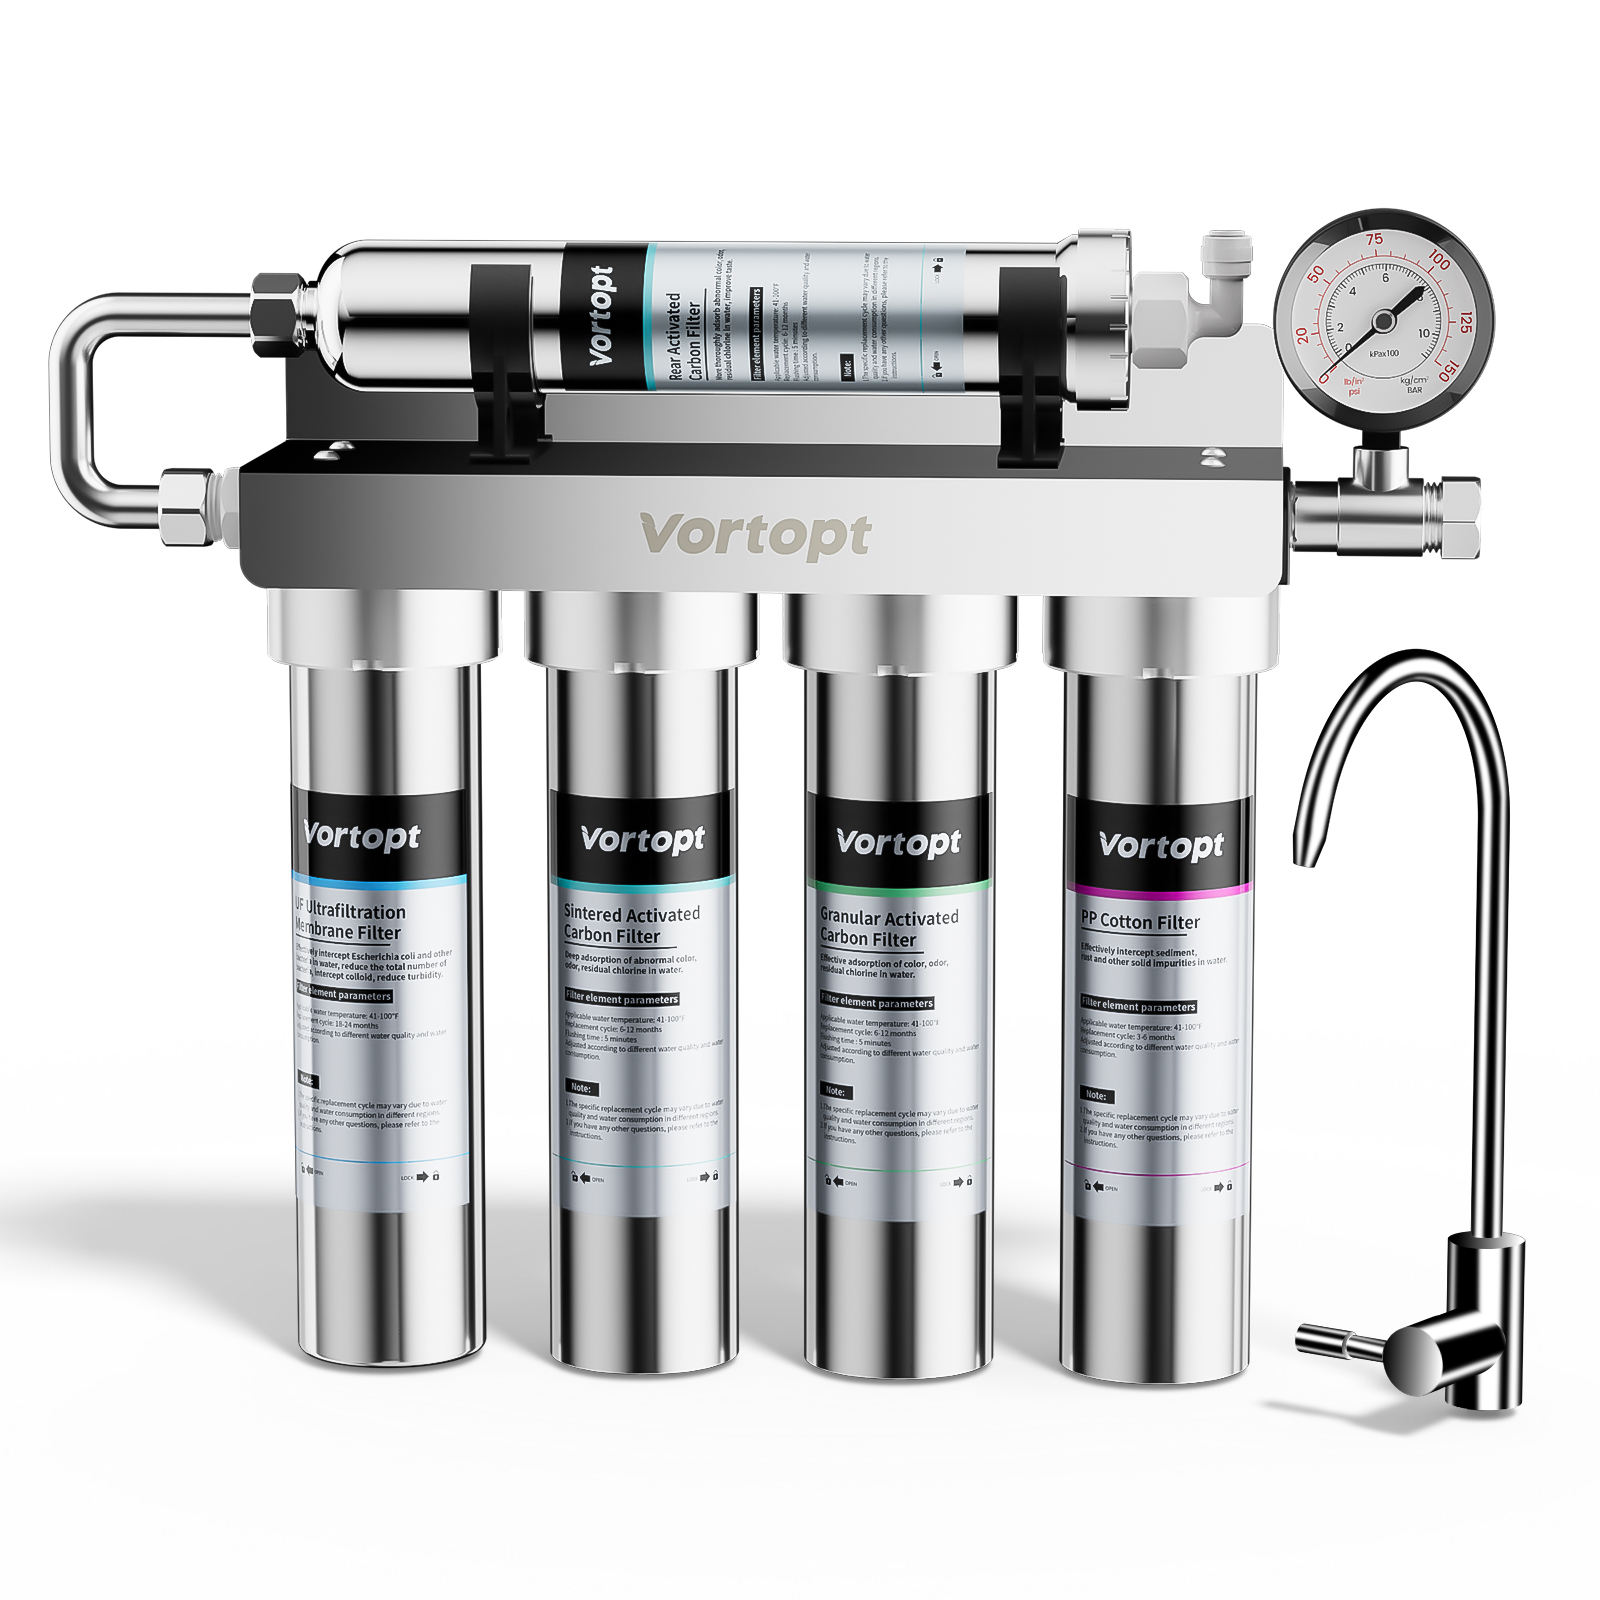  U1 Ultrafiltration 0.01 Micron Under Sink Water Filter - Stainless Steel 5-Stage High Chlorine Reduction Water Filtration System, Vortopt